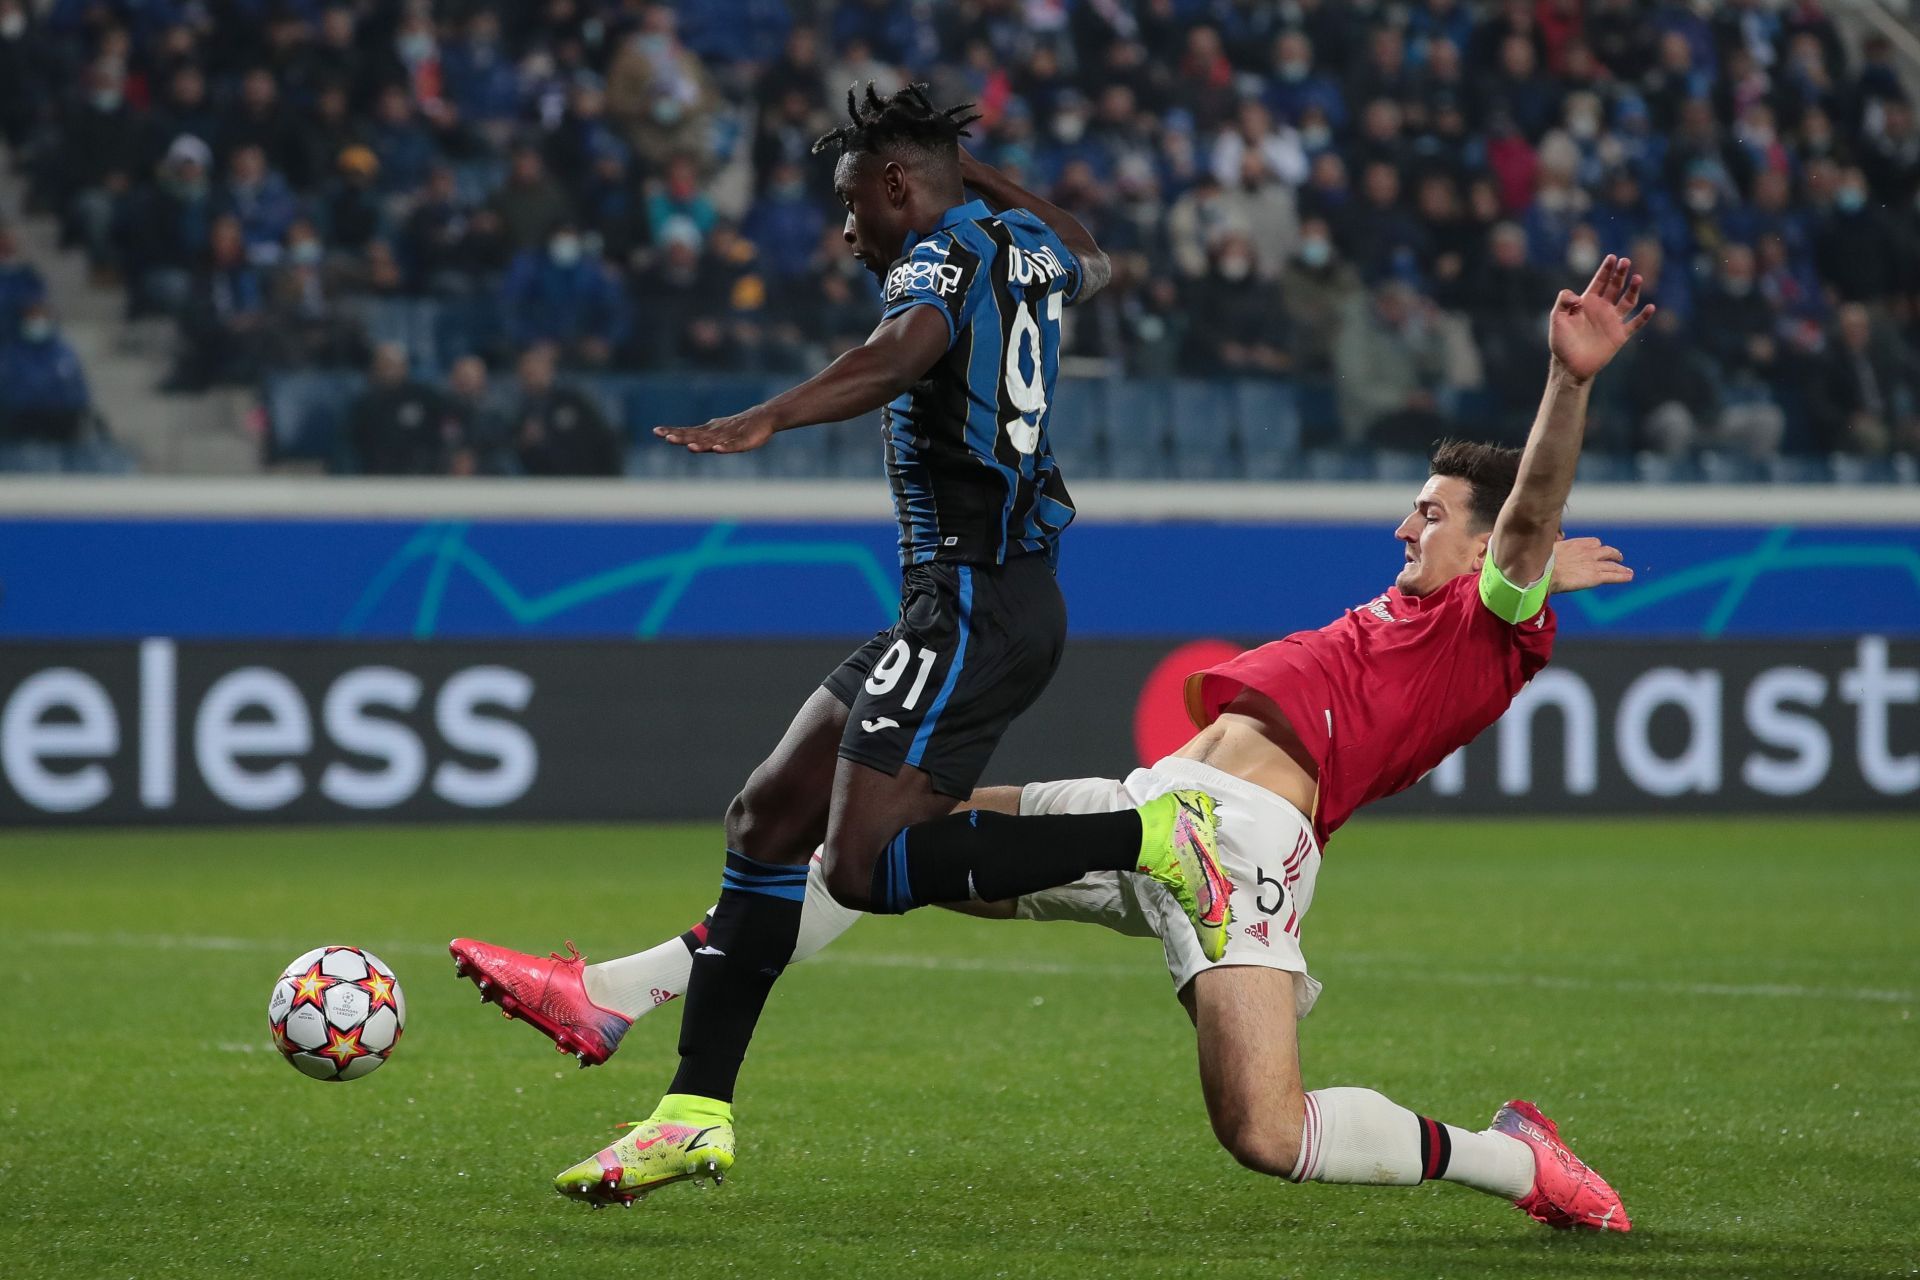 Harry Maguire was part of the back three that Manchester United lined up with against Atalanta